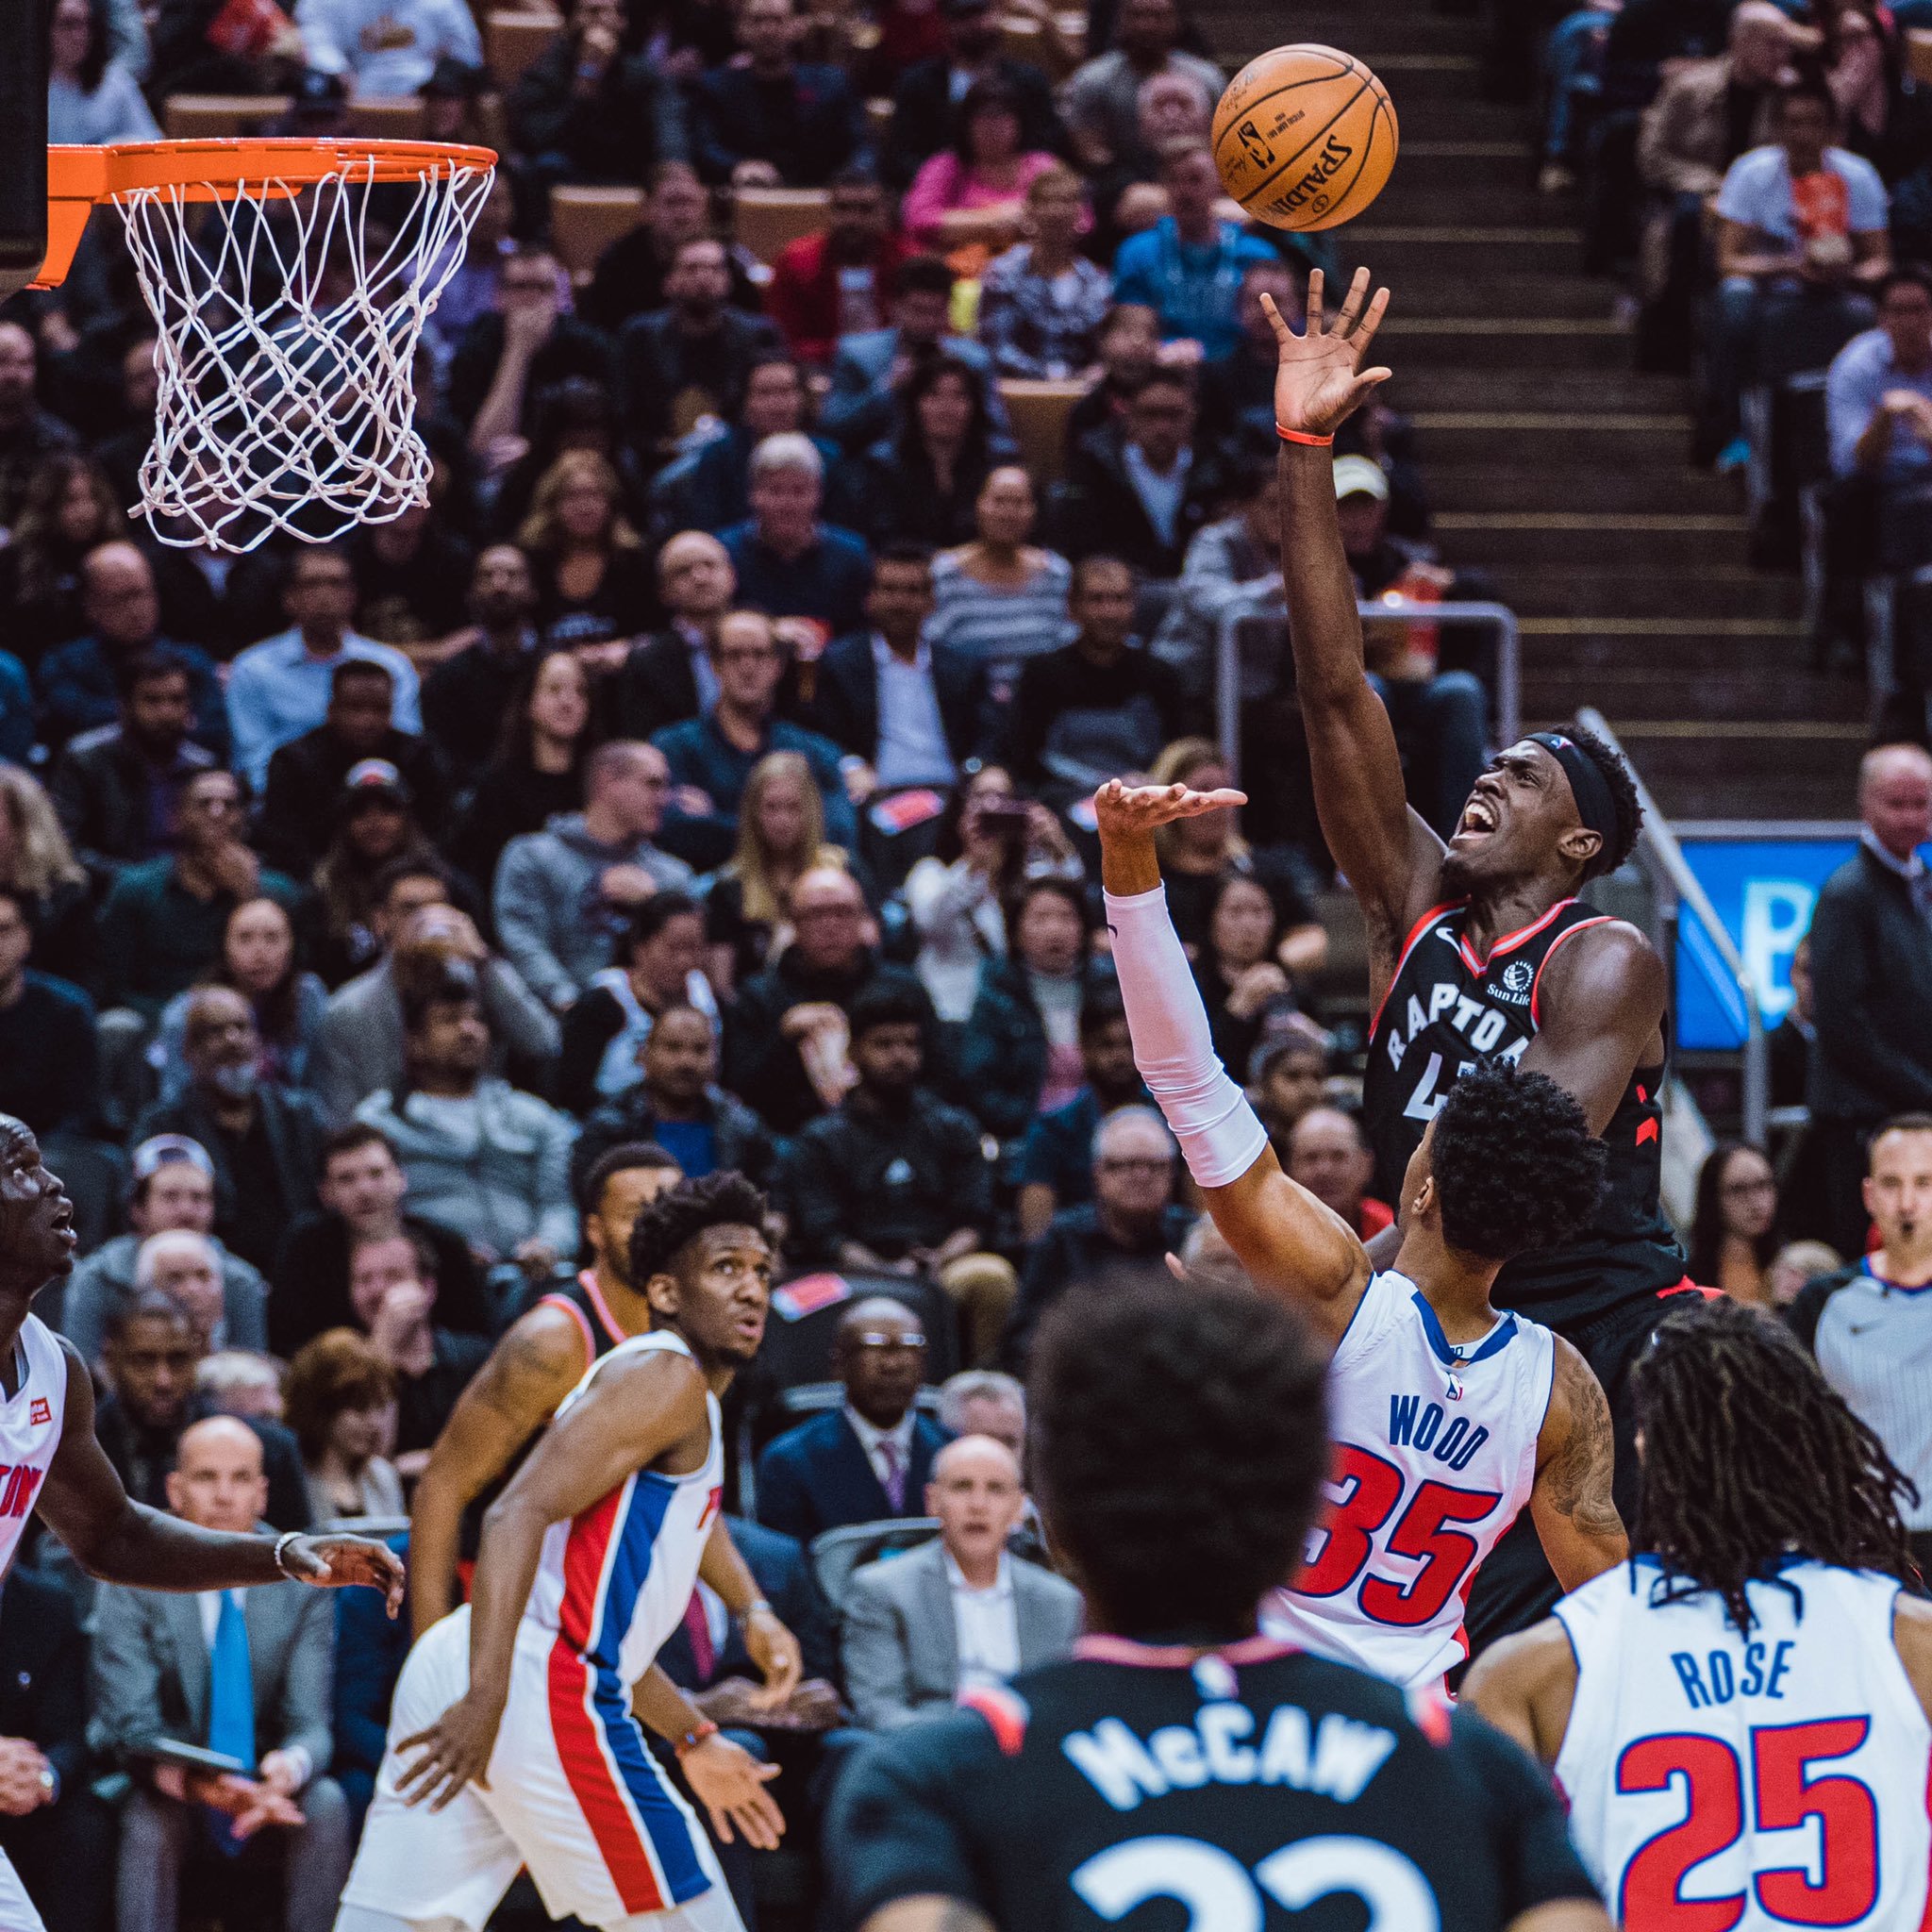 Flipboard: Pascal Siakam's Skills At Last Night's Game Has Some Fans Thinking He's The ...2048 x 2048